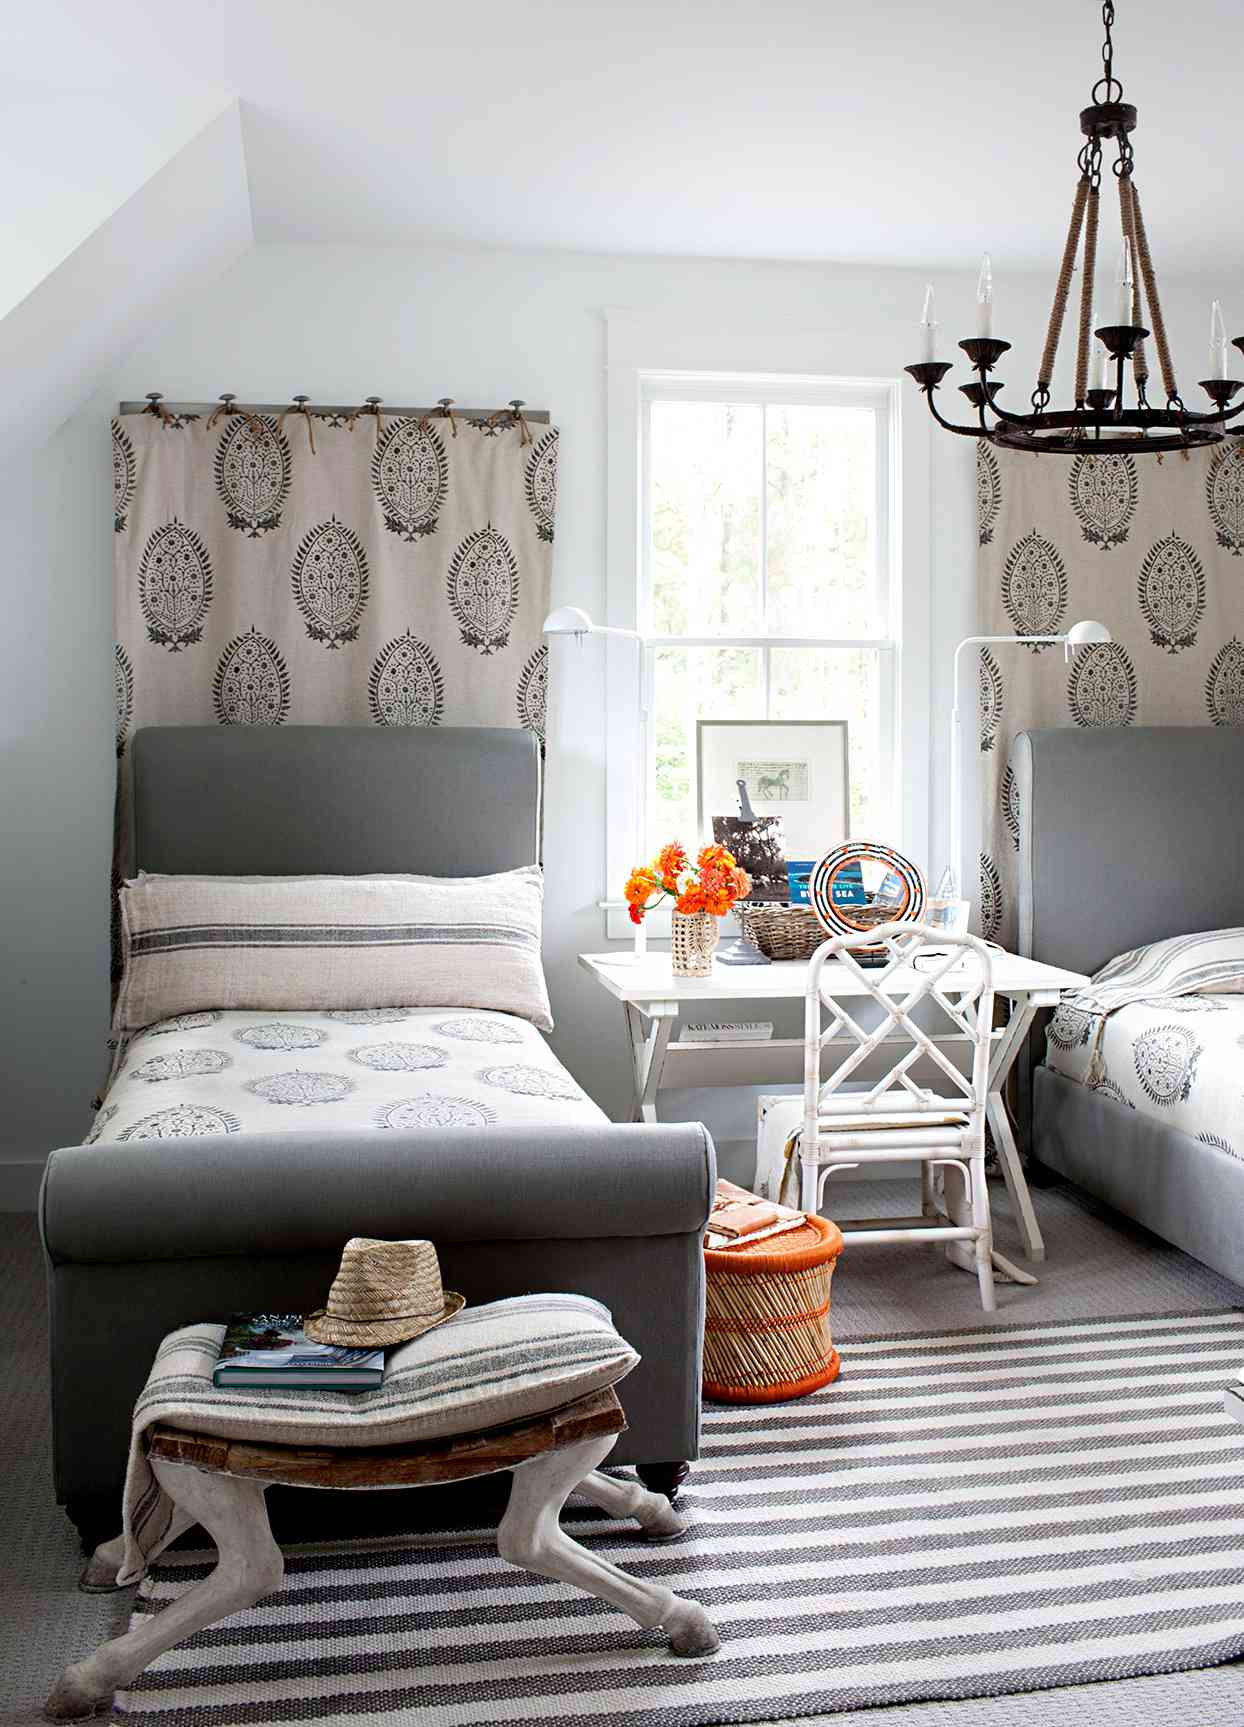 Gray and white themed bedroom